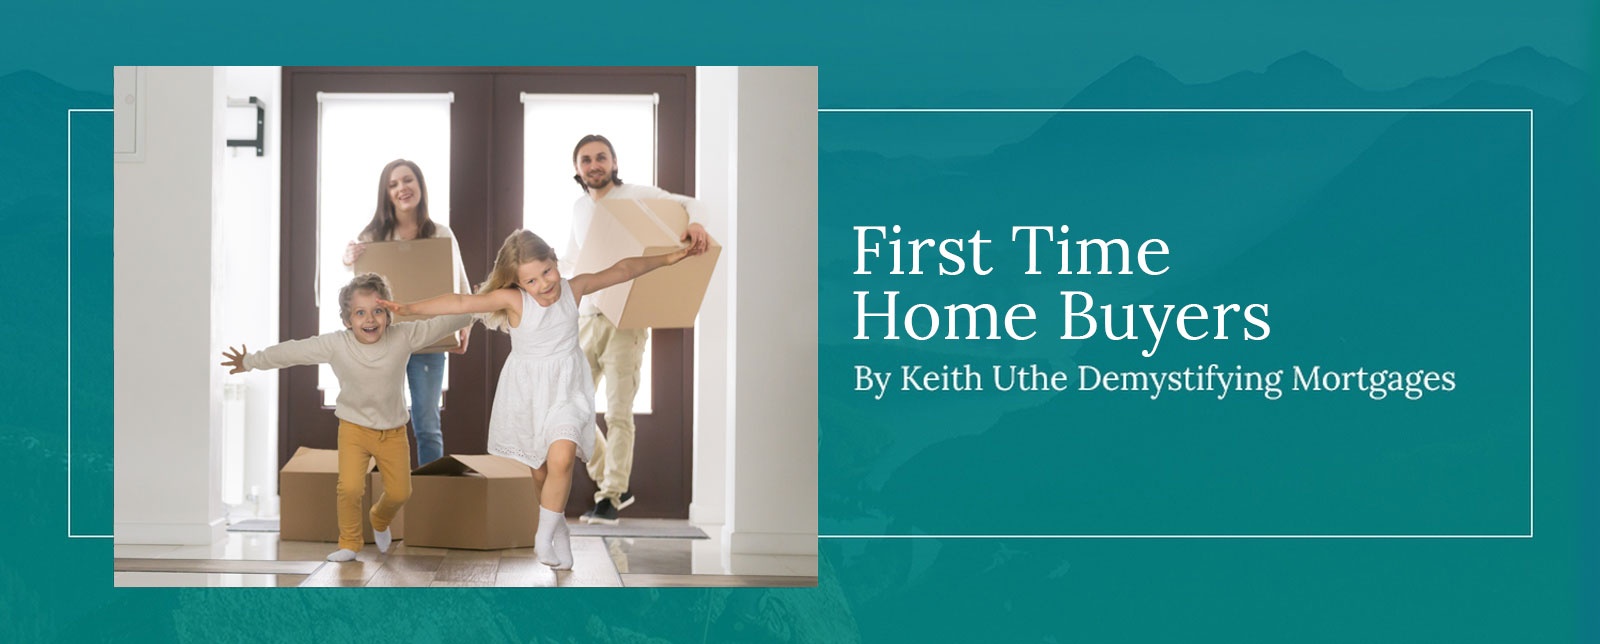 Keith Uthe Demystifying Mortgages - First Time Home Buyer Mortgage Services in Calgary, Edmonton, AB